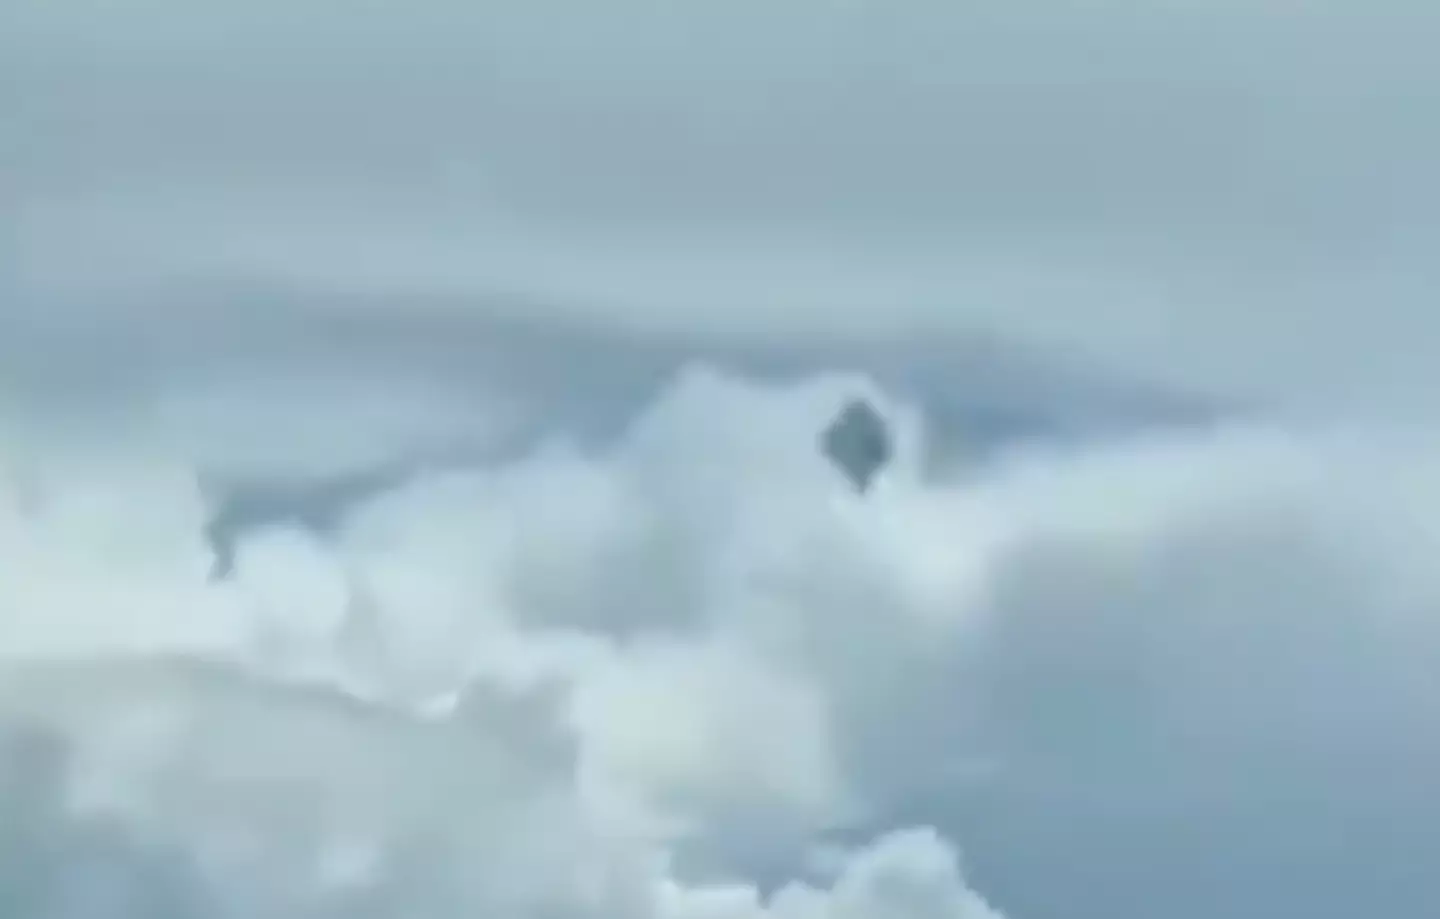 The object was seen by both the pilot and the co-pilot.